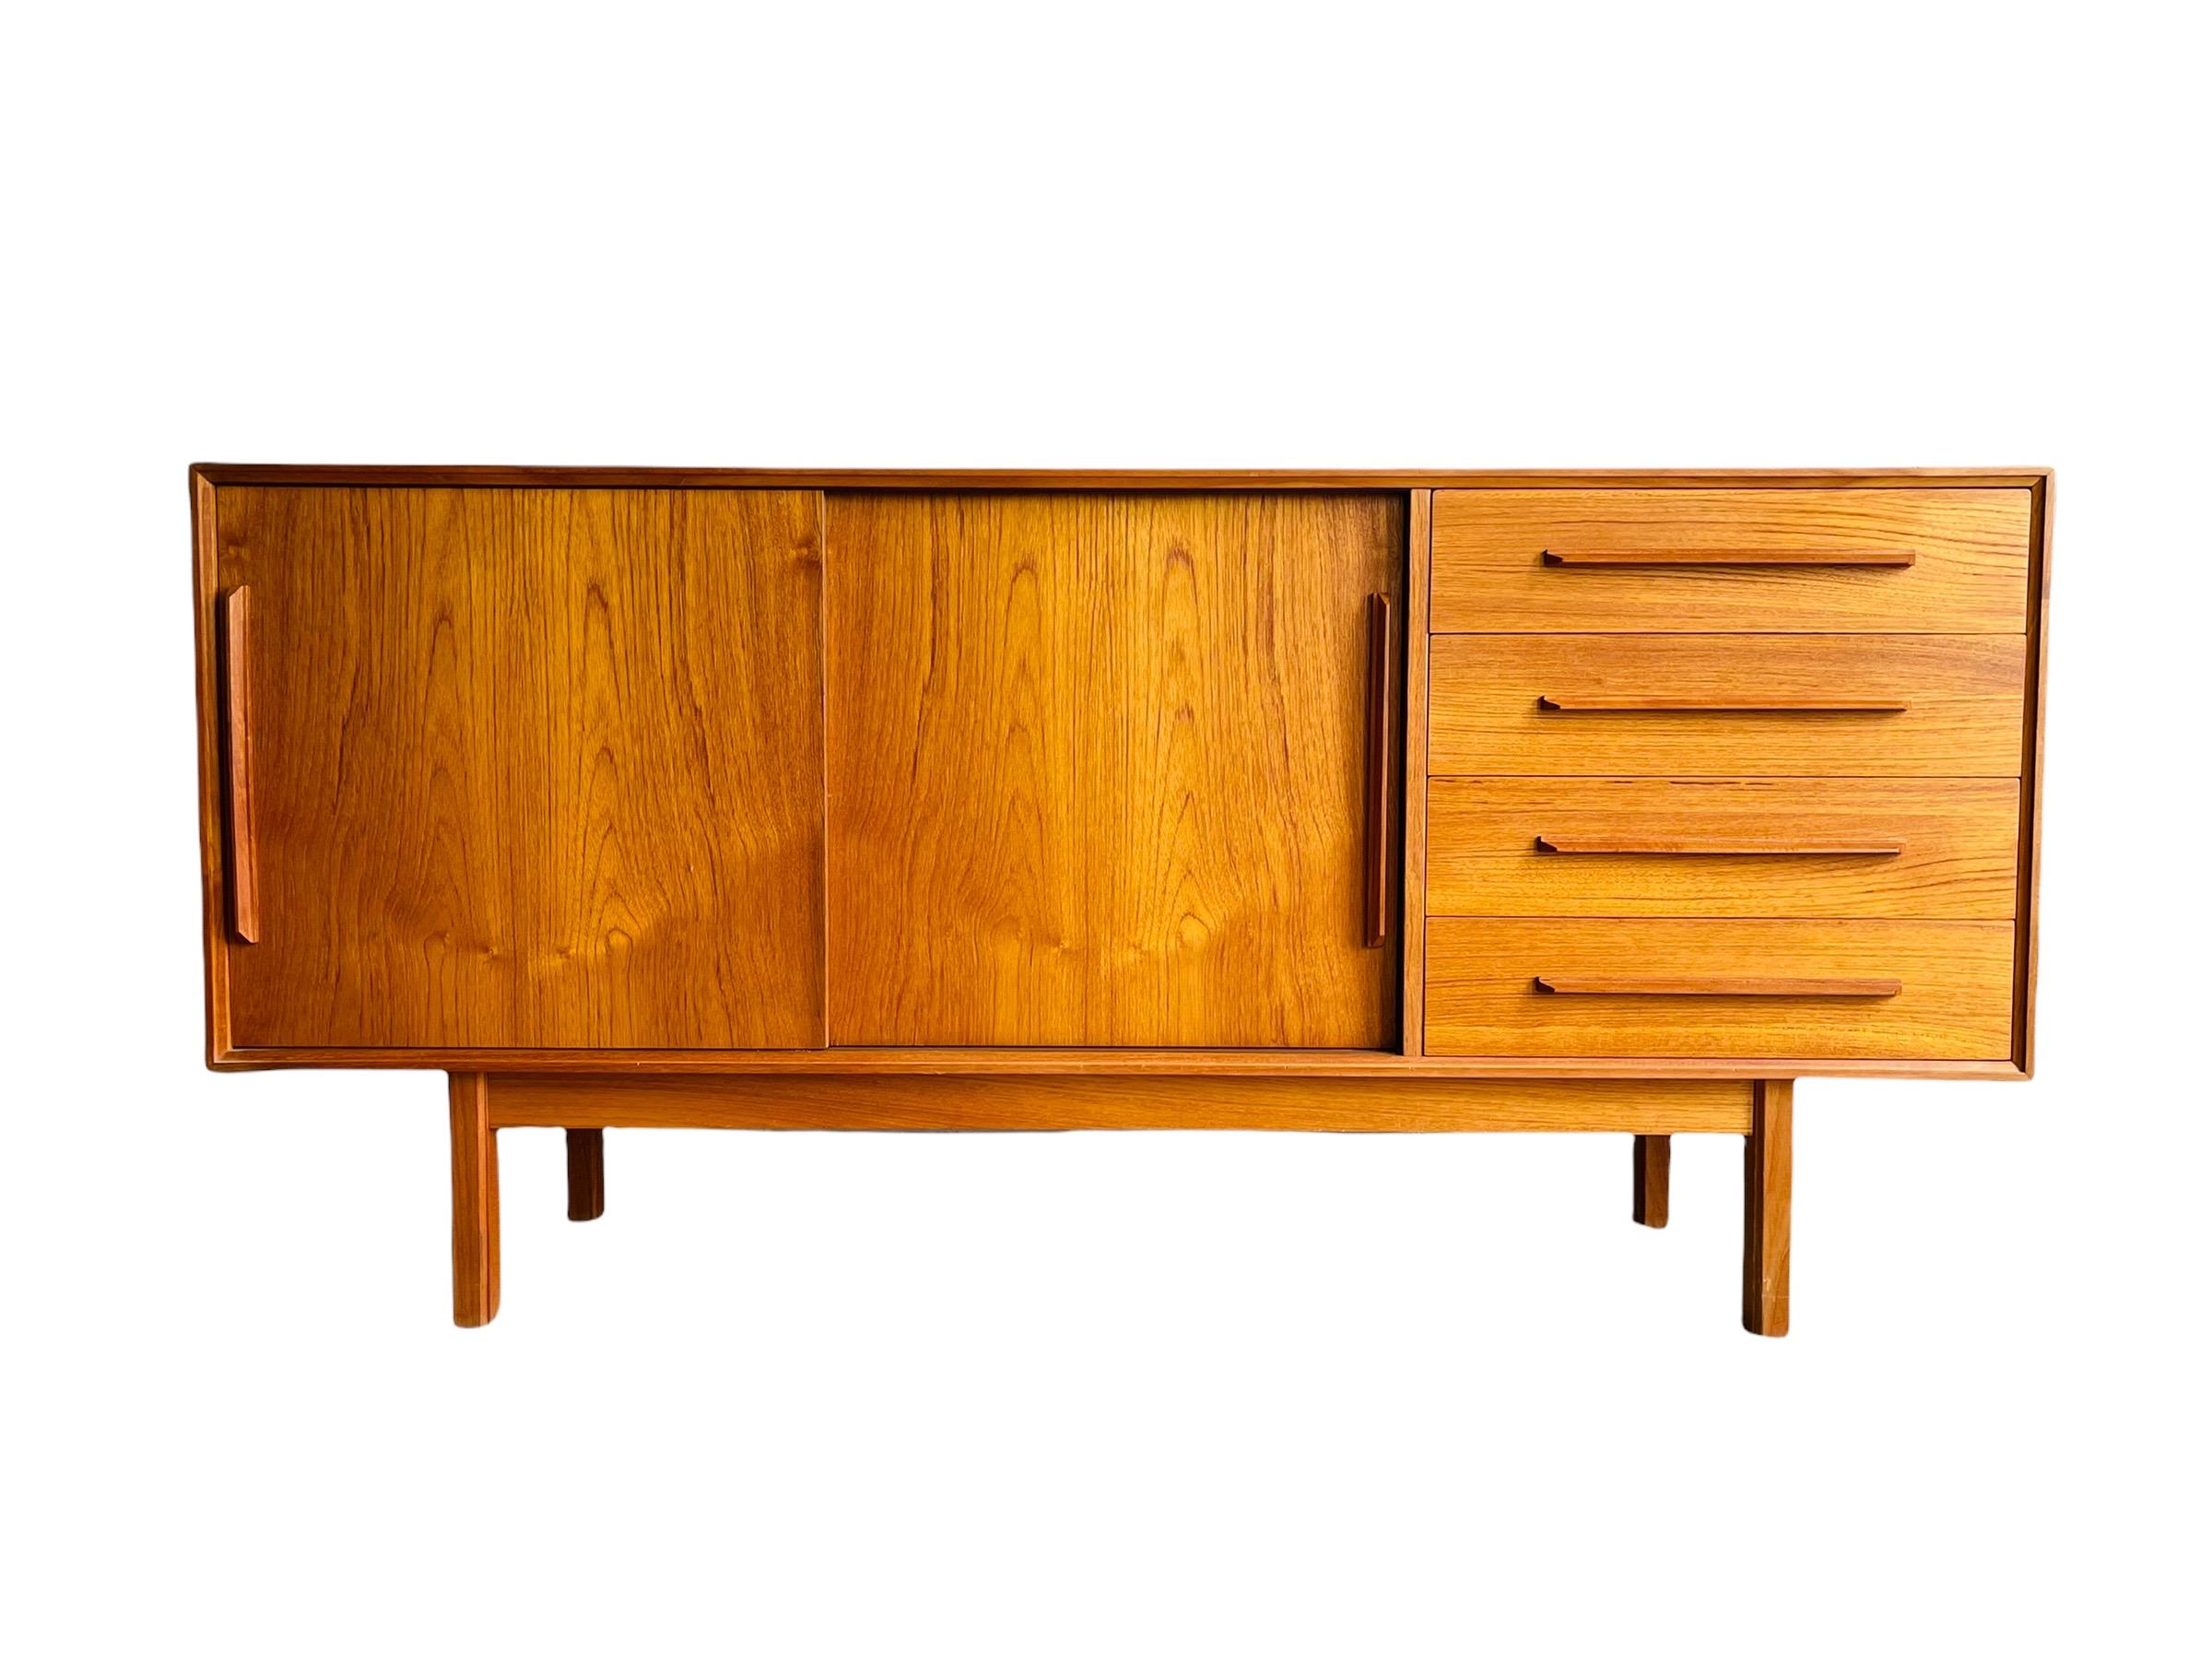 Mid-Century Modern Teak Credenza with four drawers, two sliding doors that open to plenty of storage space. This credenza is in good vintage condition with normal wear consistent with age and use. 

Measures: W 60.5” x D 17.5” x H 29”.